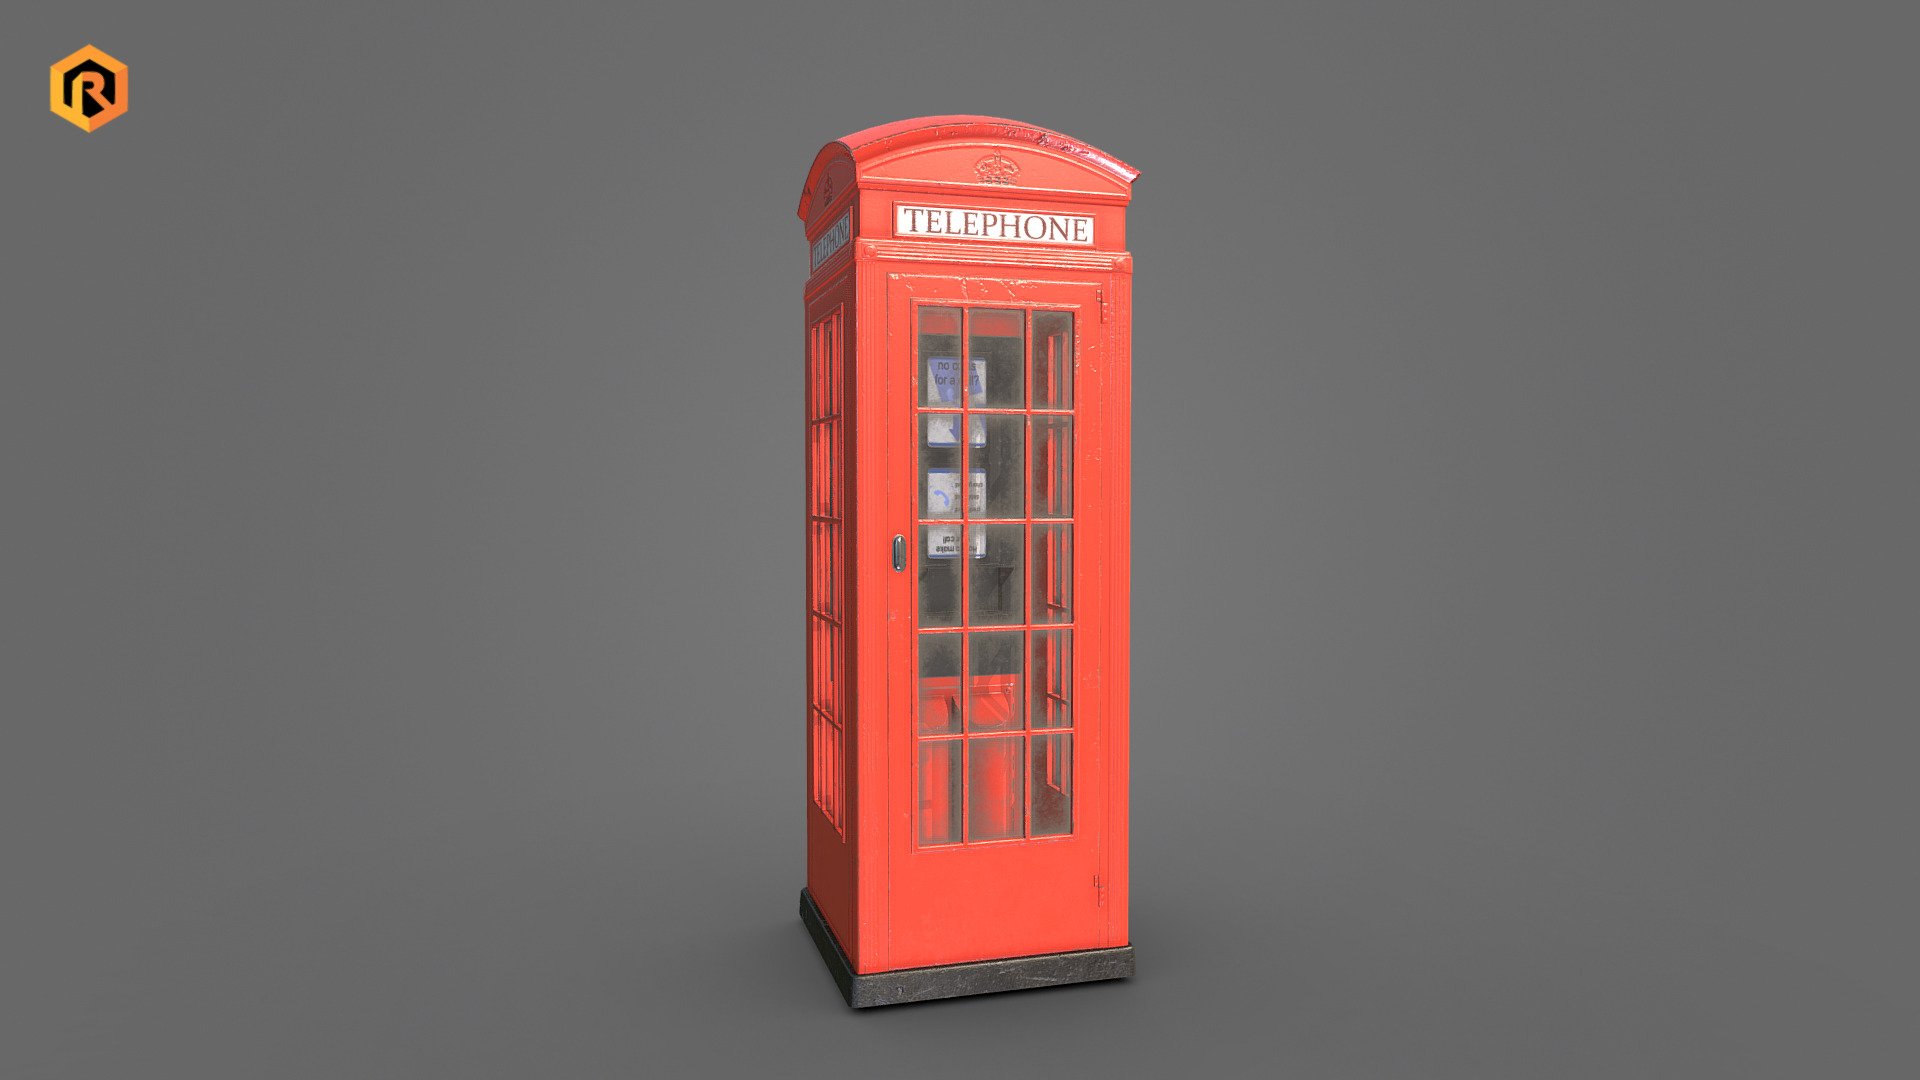 High quality PBR Low-Poly 3d model of British Phone Booth. It is best for use in games and other real time applications. Model is built with great attention to details and realistic proportions with correct geometry. Texture is very detailed so it makes 
this model good enough for close-ups.

Model Info:




3 PBR textures sets. (Main Body, Glass, Phone) 

3802 Triangles.

4021  Vertices.

The model is divided into few 3 objects (Base, Door, Phone)

Model completely unwrapped.

Model is fully textured with all materials applied. 

Pivot point centered at world origin.

Model scaled to approximate real world size (centimeters).

All nodes, materials and textures are appropriately named.

PBR Texture sets details:




4096 Main Body texture set (Albedo, Metallic, Smoothness, Normal, Ambient Occlusion)

1024 Glass texture set (Albedo, Metallic, Smoothness, Normal, Ambient Occlusion)

1024 Phone texture set (Albedo, Metallic, Smoothness, Normal, Ambient Occlusion)
 - Vintage Phone Booth - Buy Royalty Free 3D model by Rescue3D Assets (@rescue3d) 3d model